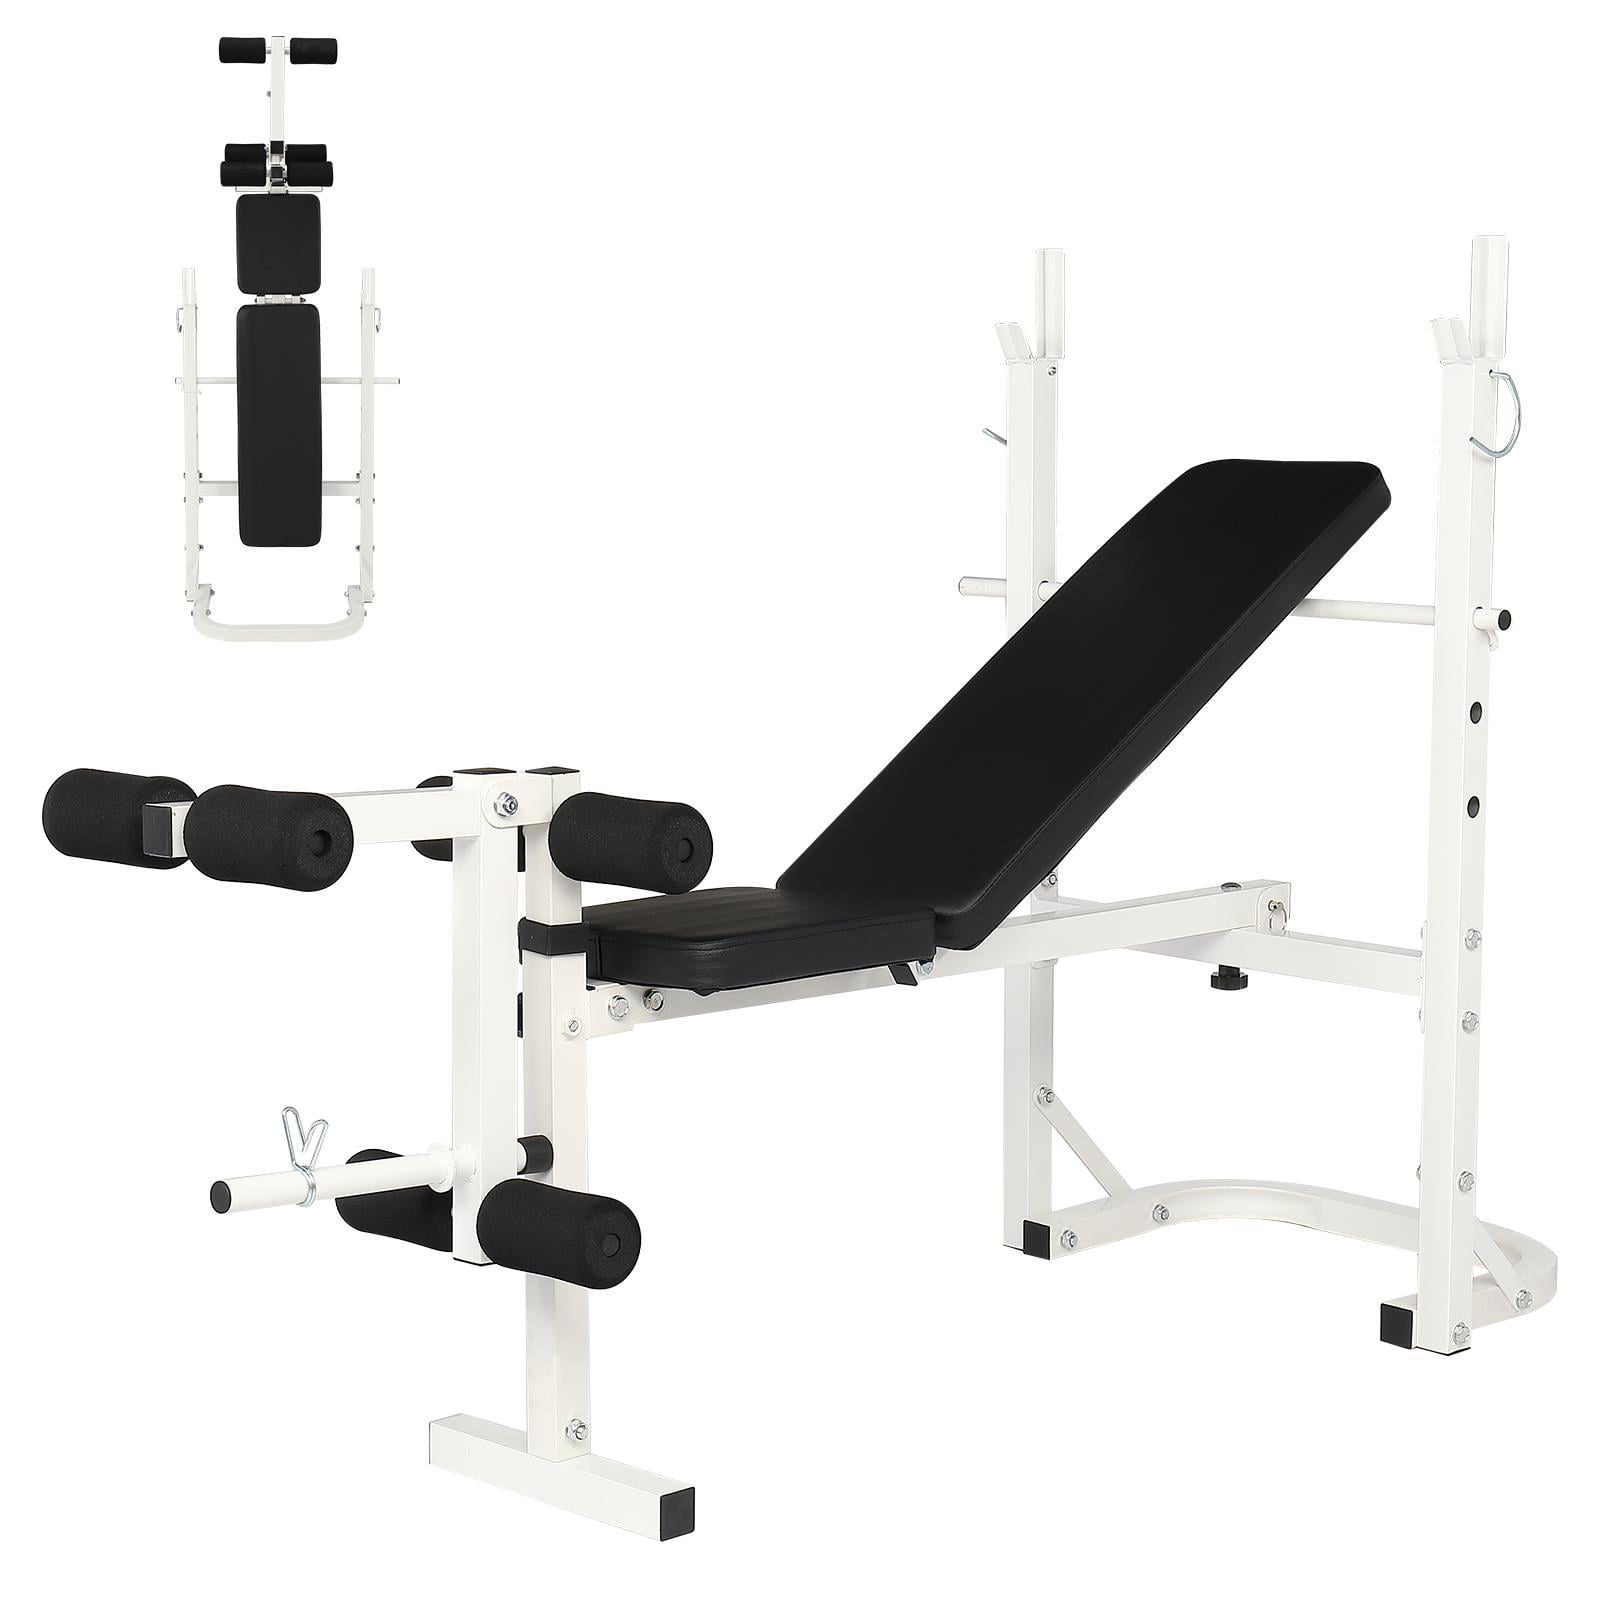 Foldable Home Gym Preacher Curl Bench Adjustable Weight Workout Bench 